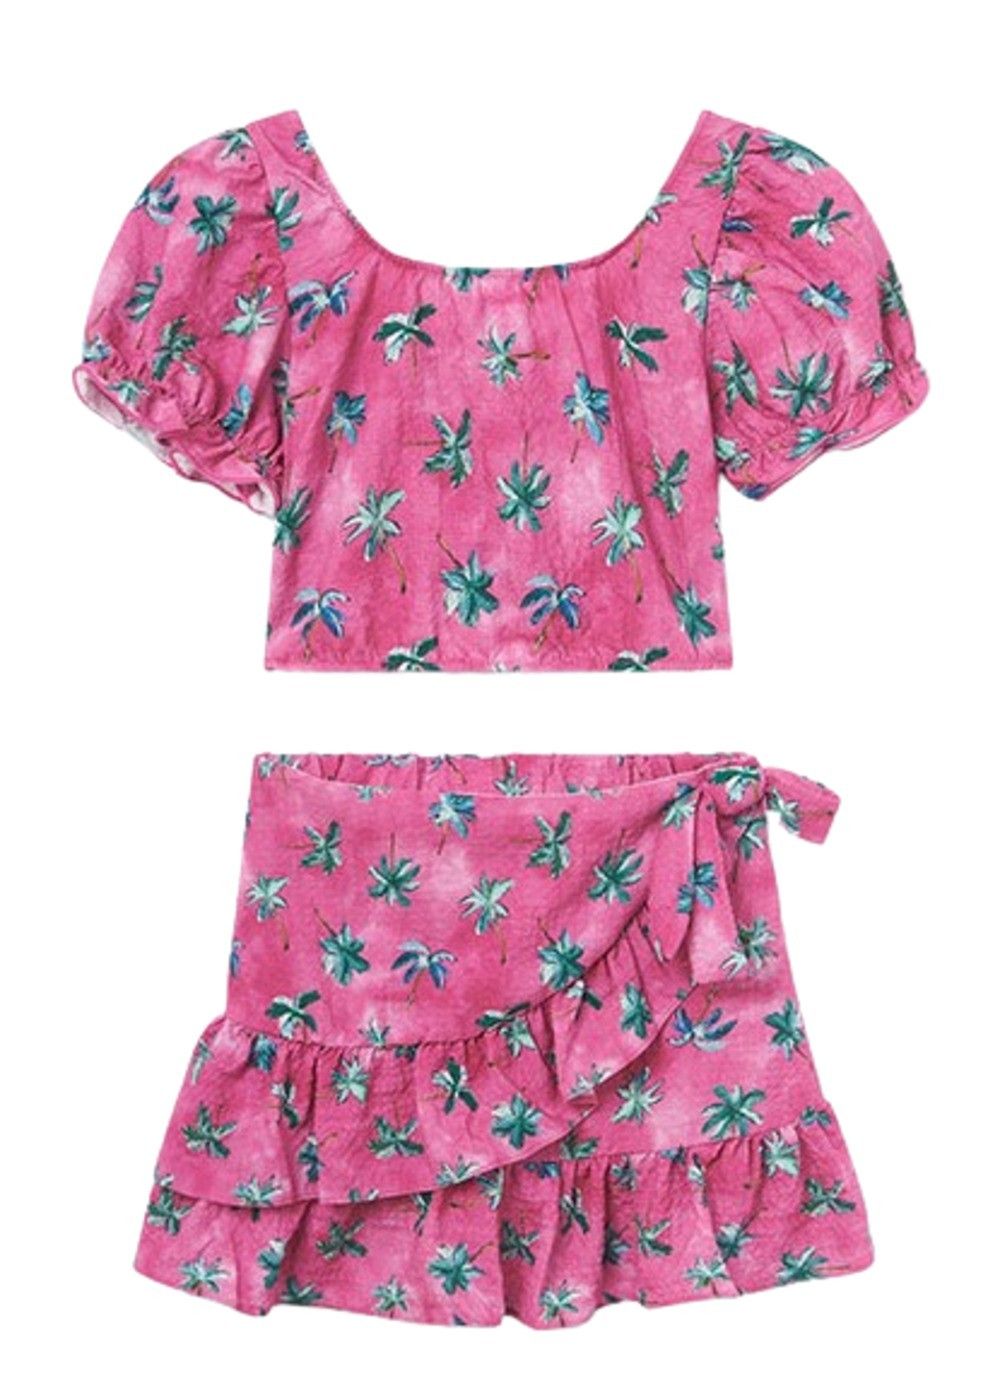 MAYORAL 6936 GIRLS PALM TREE PRINTED CROP TOP WITH MATCHING SKIRT